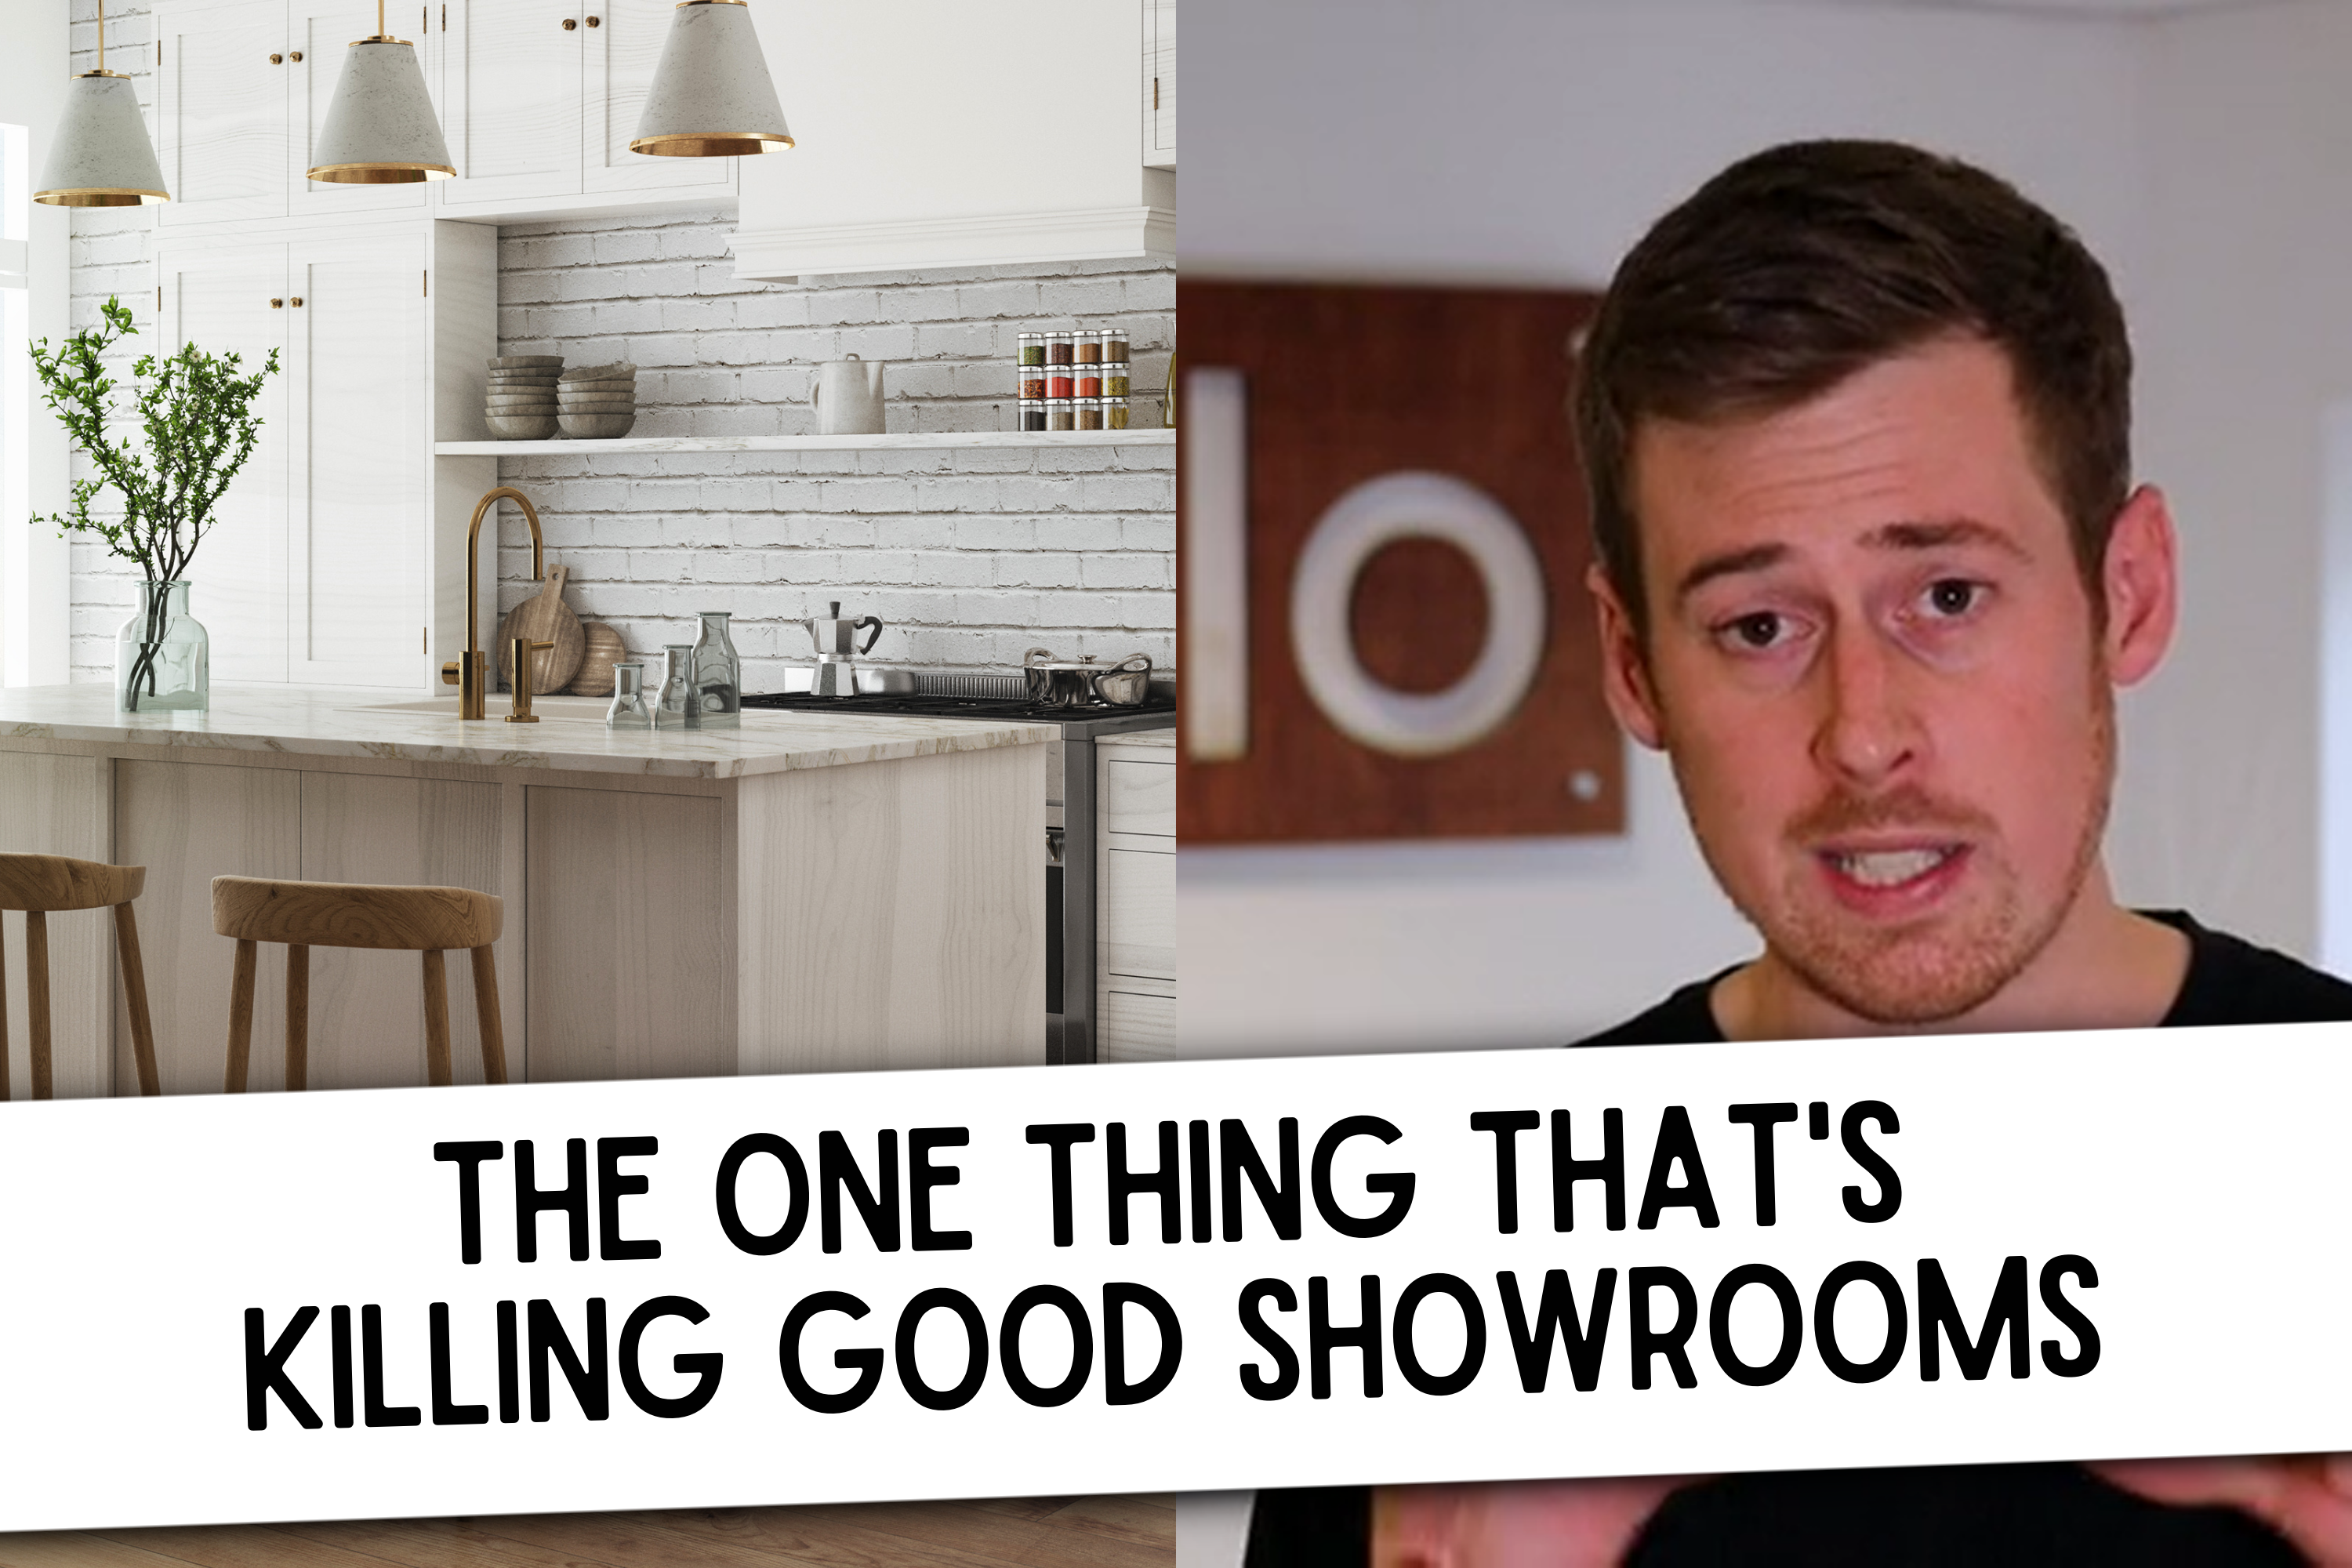 One thing killing kitchen showrooms